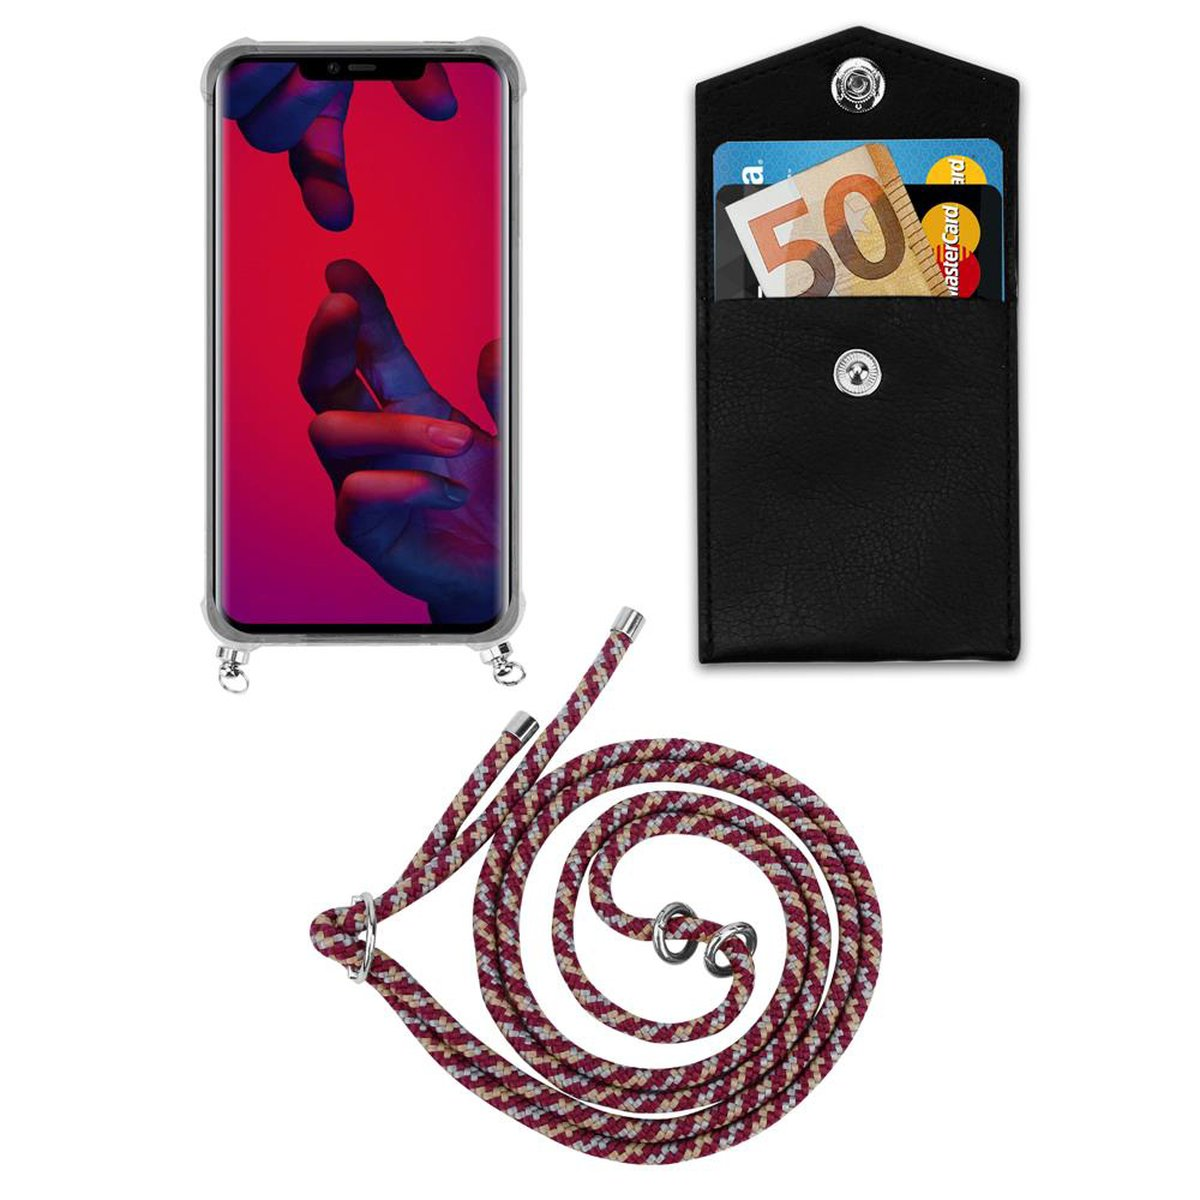 CADORABO Handy mit PRO, Silber MATE abnehmbarer GELB Ringen, Kette Huawei, Band WEIß ROT 20 Hülle, Backcover, und Kordel